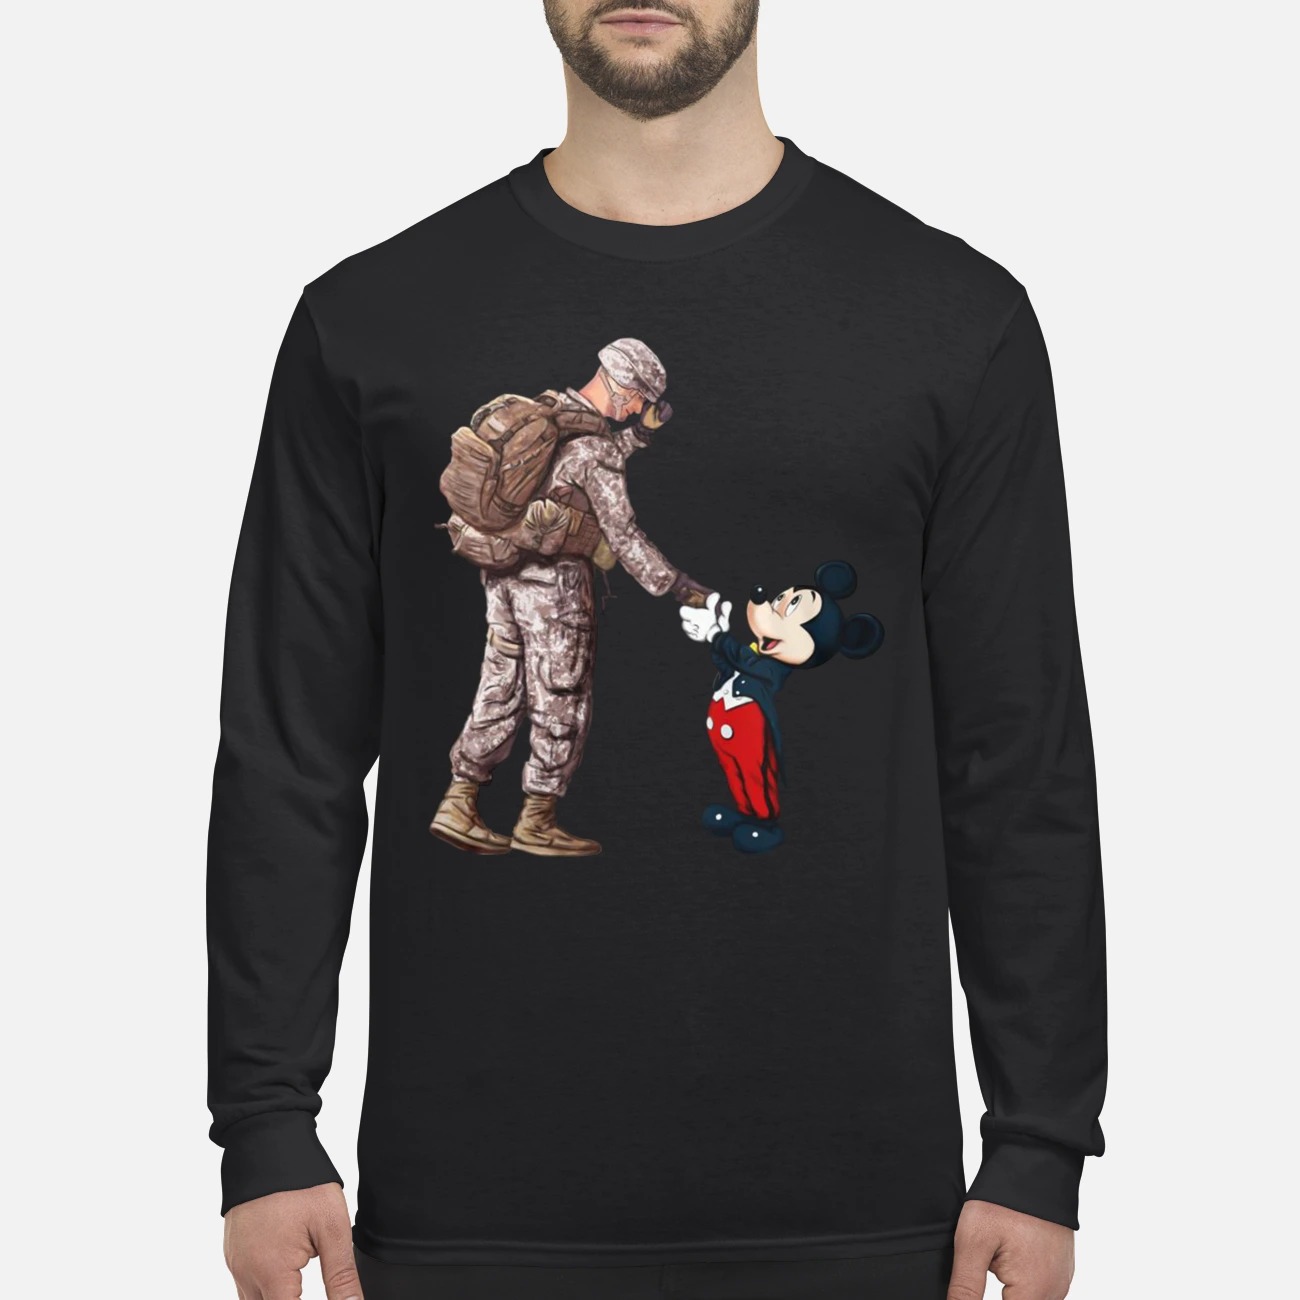 Mickey mouse and veteran soldier men's long sleeved shirt